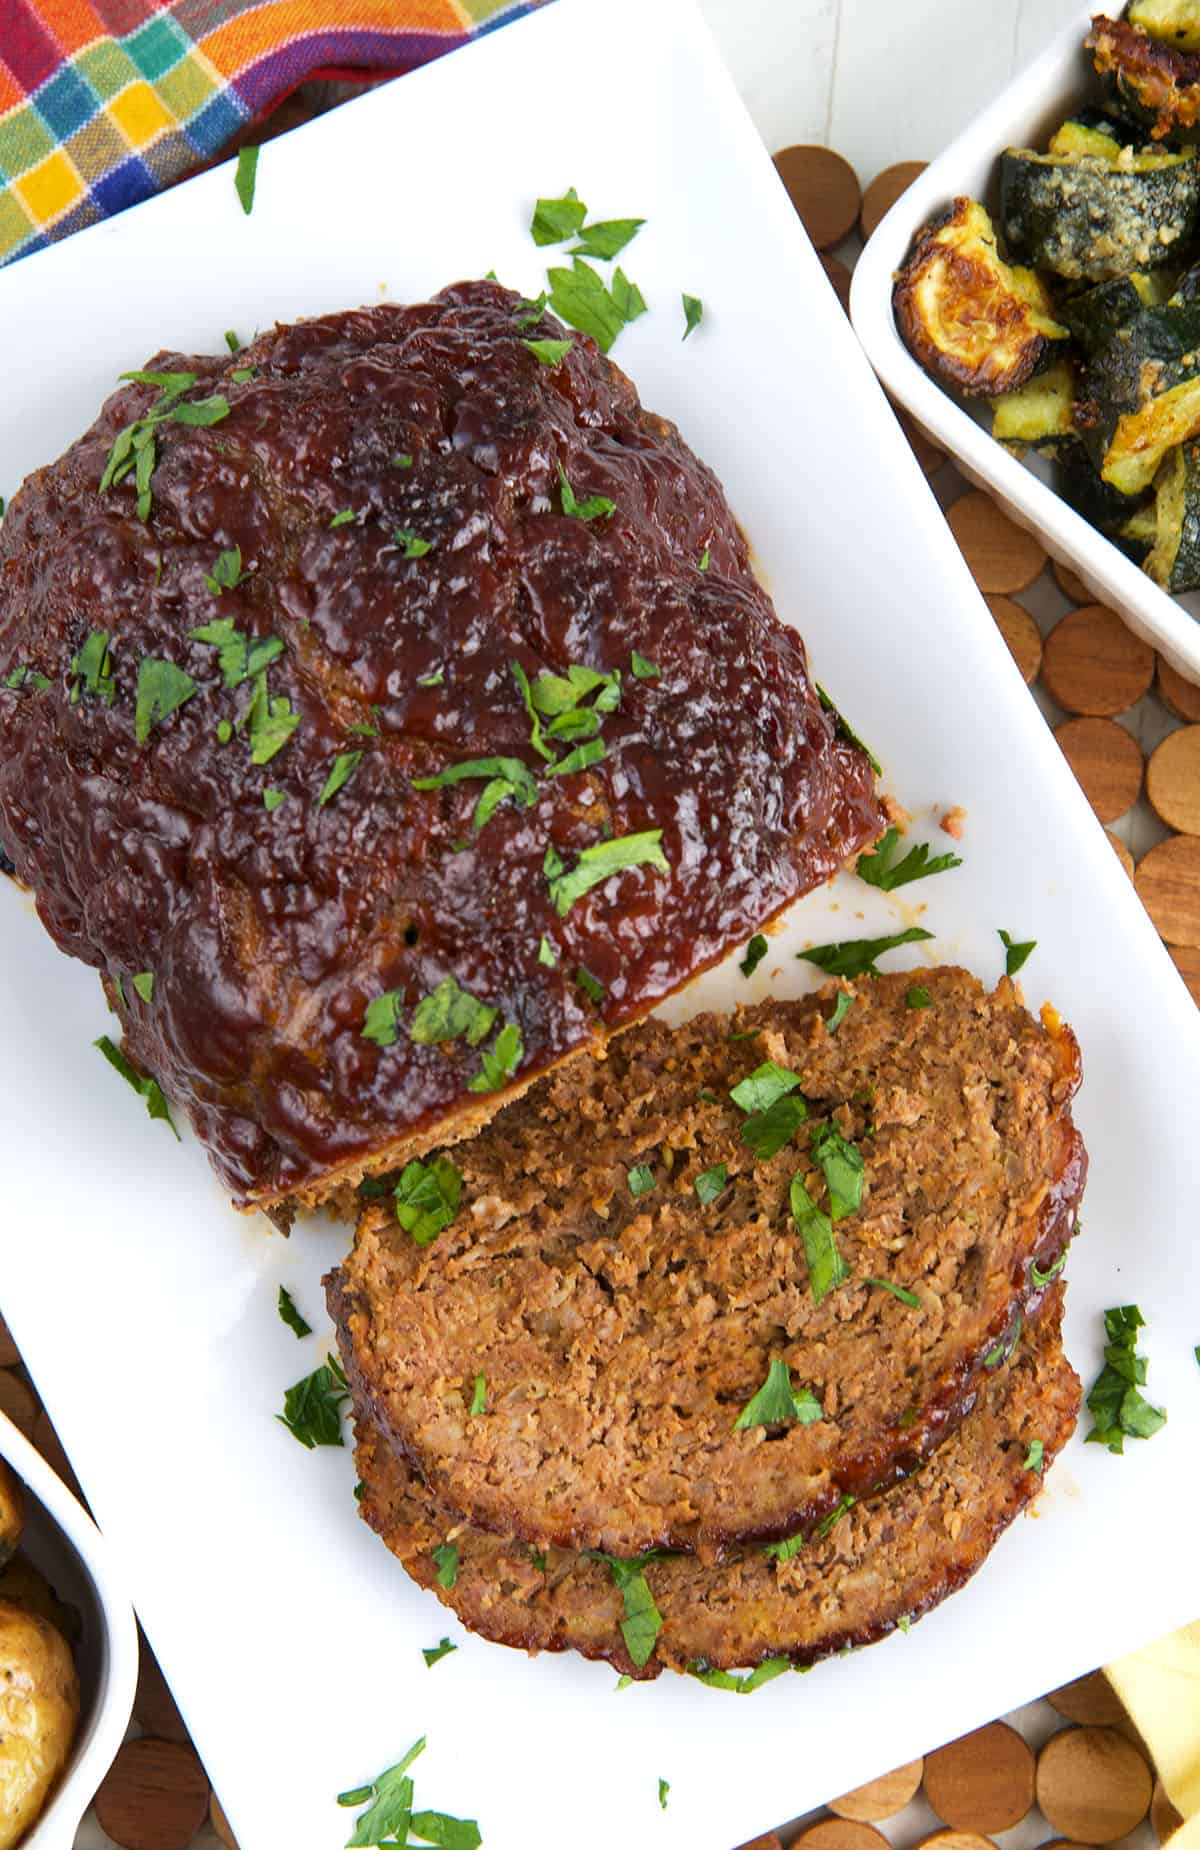 A baked meatloaf is partially sliced and placed on a white serving plate.